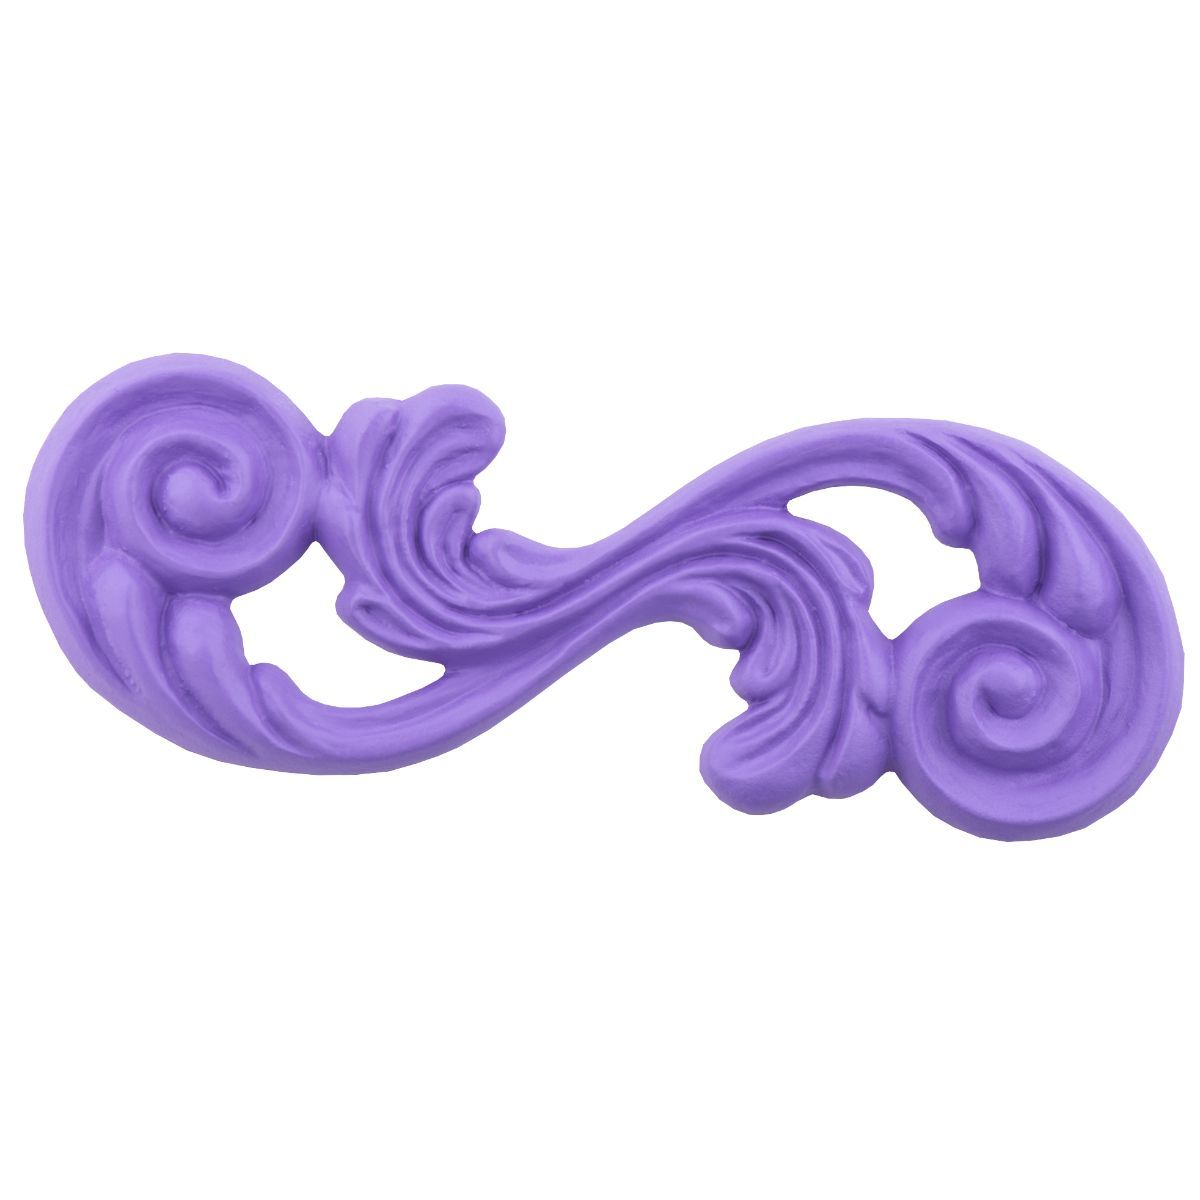 Swirl S-Curve Marvelous Molds Silicone Mold - Bake Supply Plus